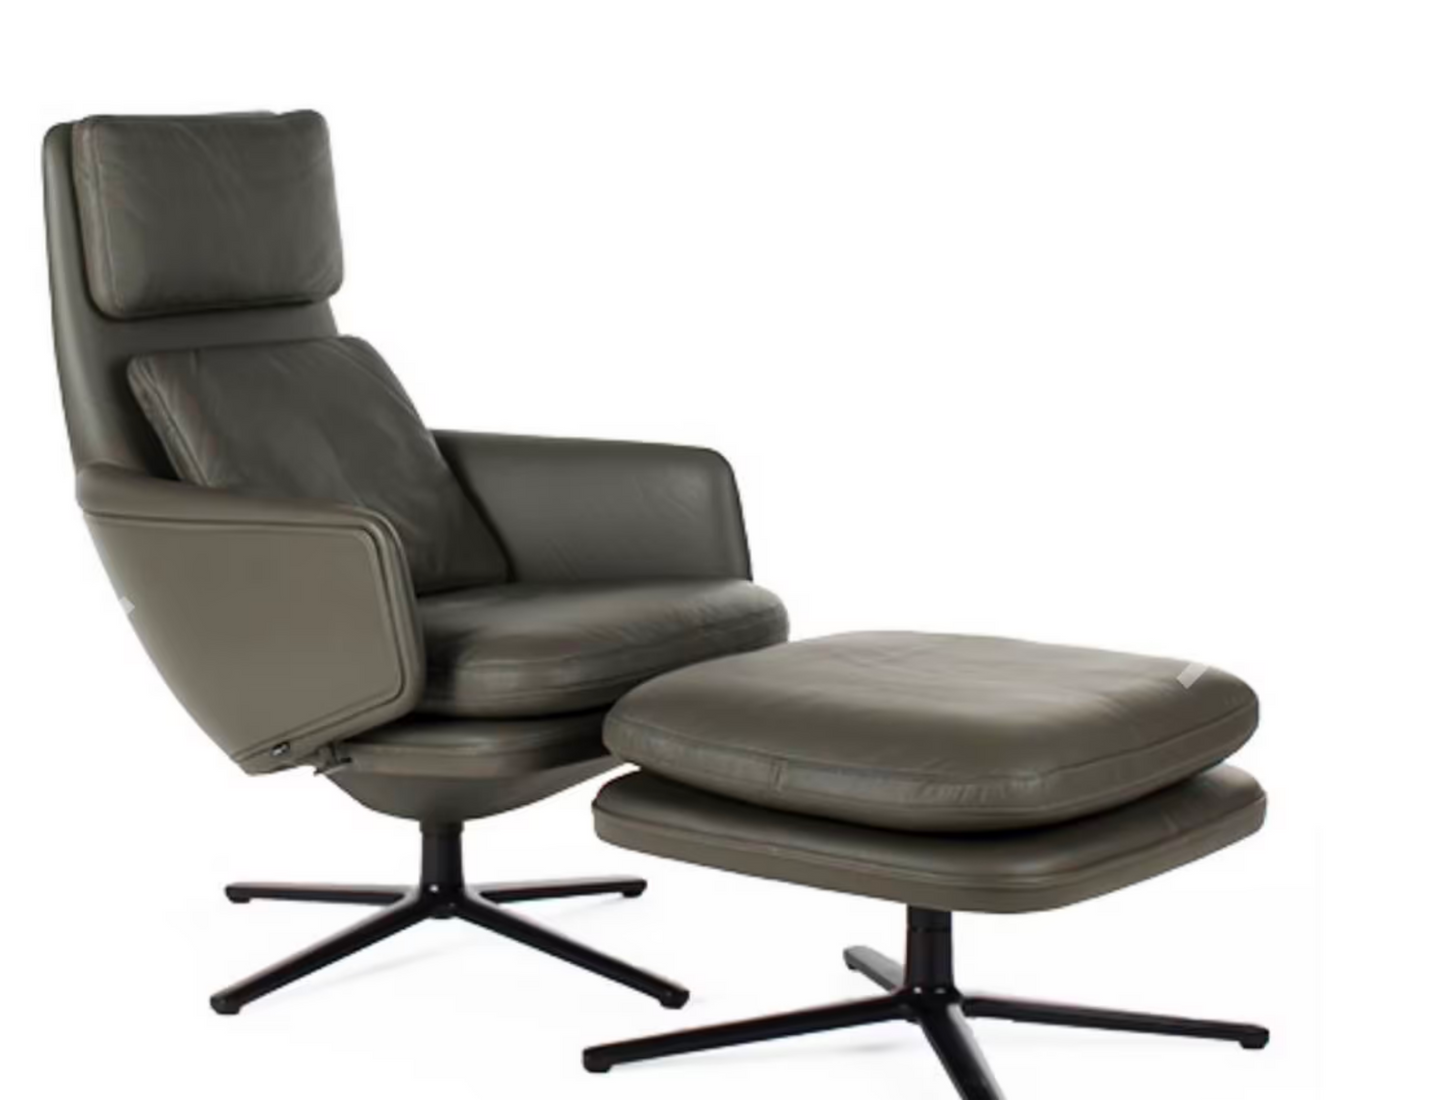 New Vitra Grand relax lounge chair + Ottoman show model